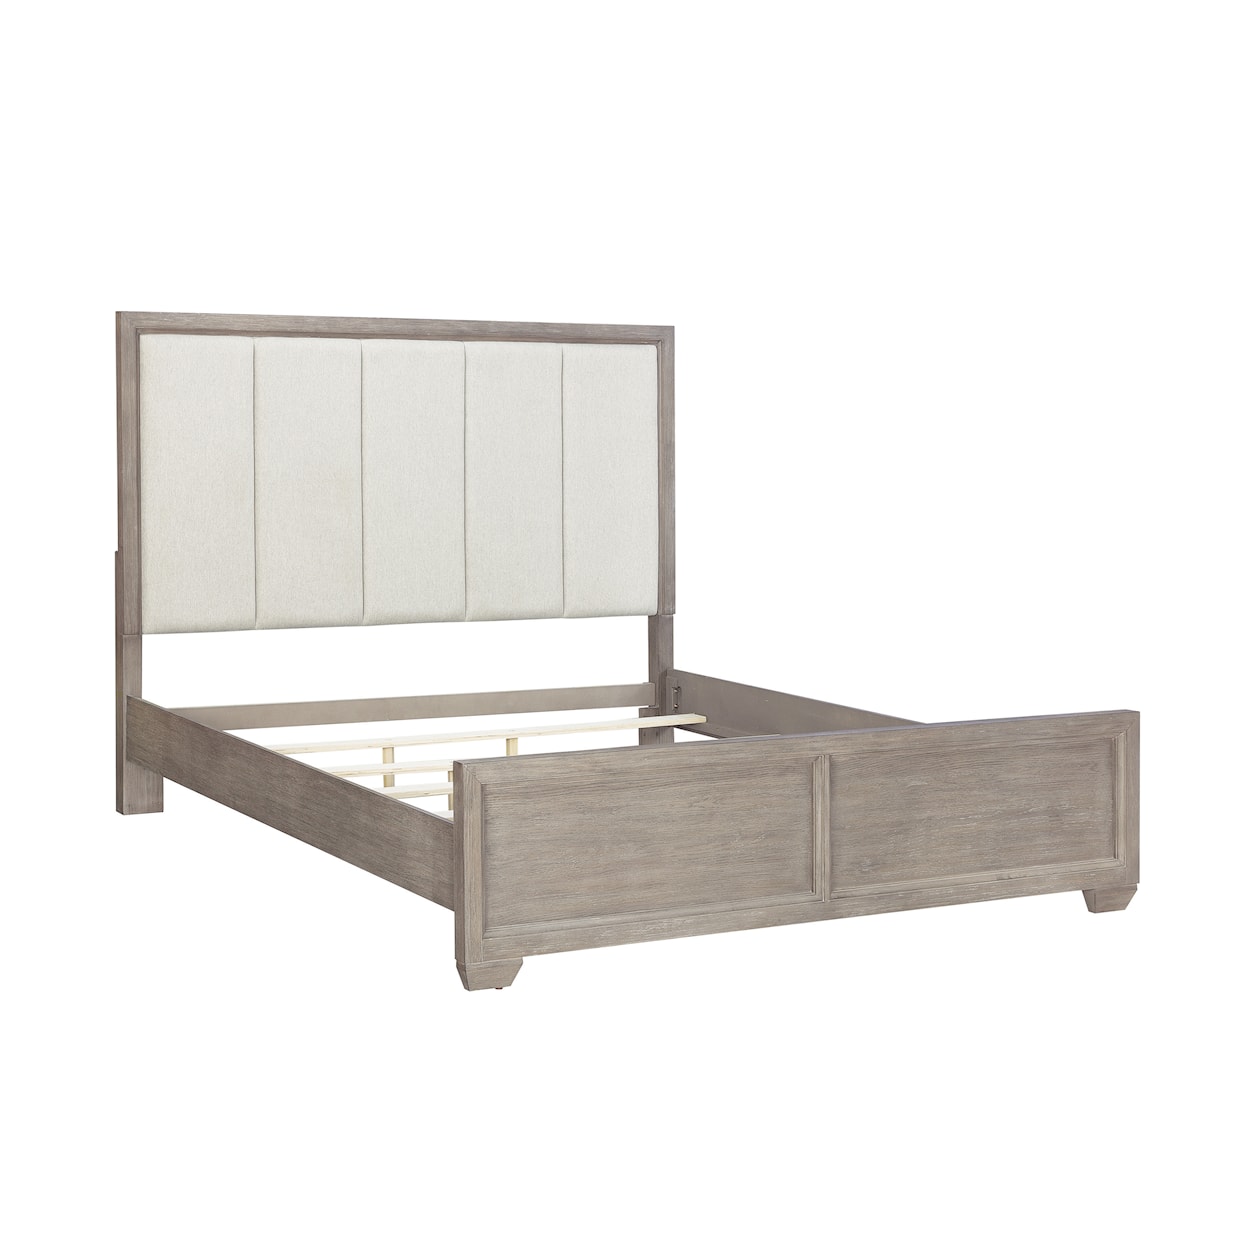 Samuel Lawrence Andover King Panel Bed